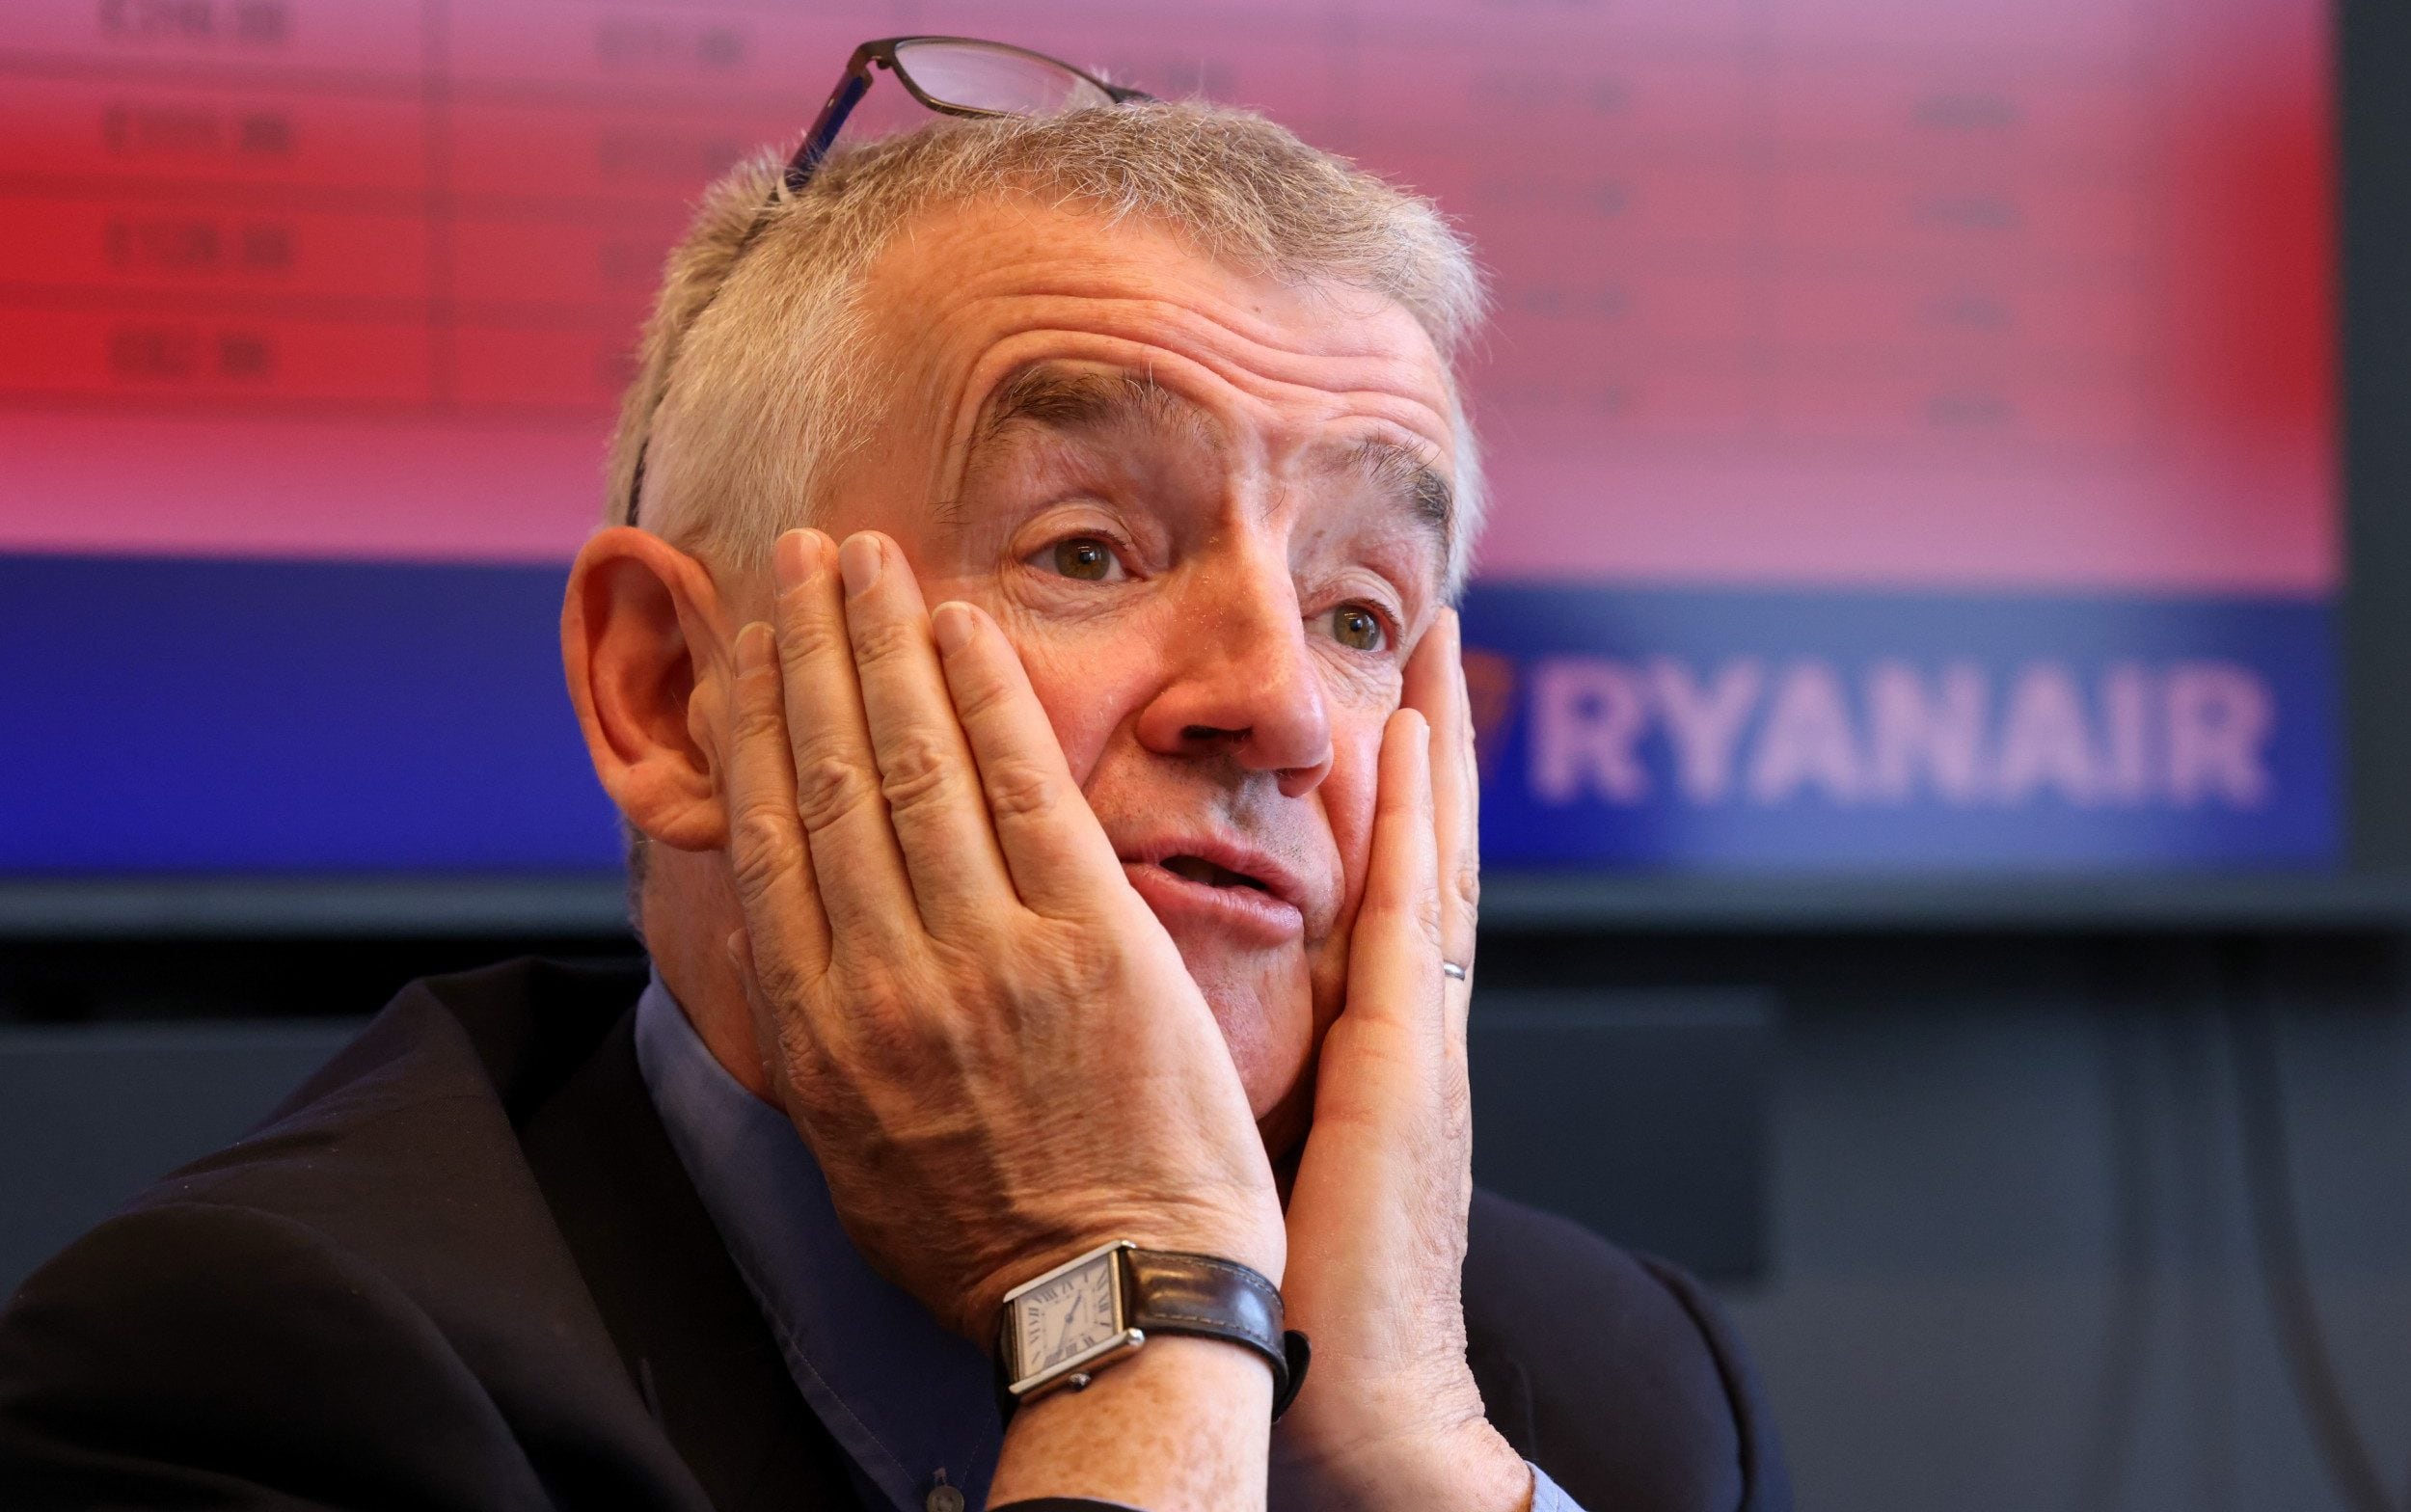 michael o’leary interview: ‘i’m not putting up with any mewling nonsense about my €100m pay’